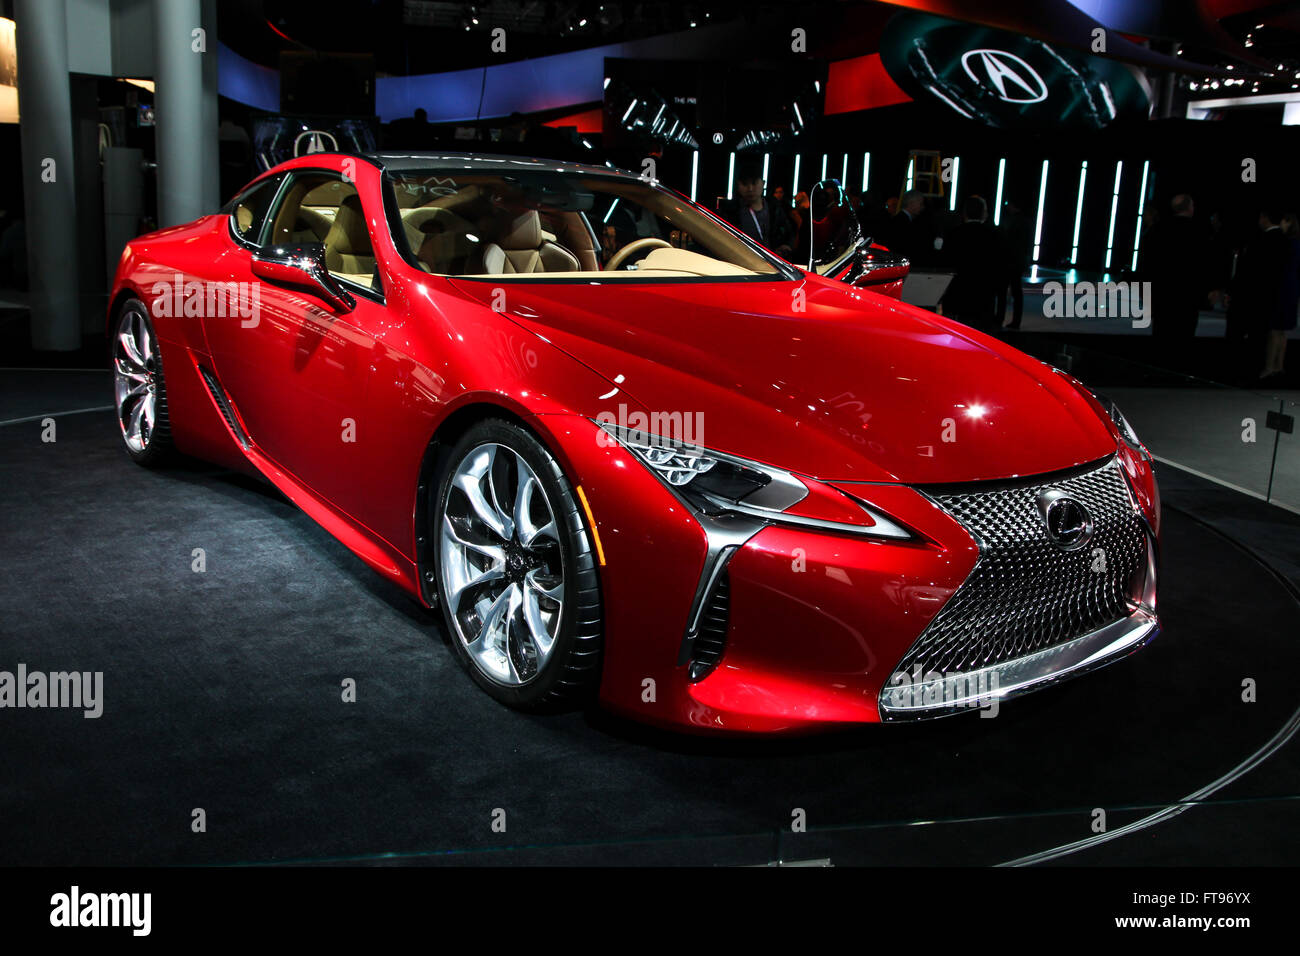 Manhattan, New York, USA. 23rd Mar, 2016. A Lexus LC 500 shown at the New York International Auto Show 2016, at the Jacob Javits Center. This was Press Preview Day one of NYIAS, and the Trade Show will be open to the public for ten days, March 25th through April 3rd. Credit:  Miro Vrlik Photography/Alamy Live News Stock Photo